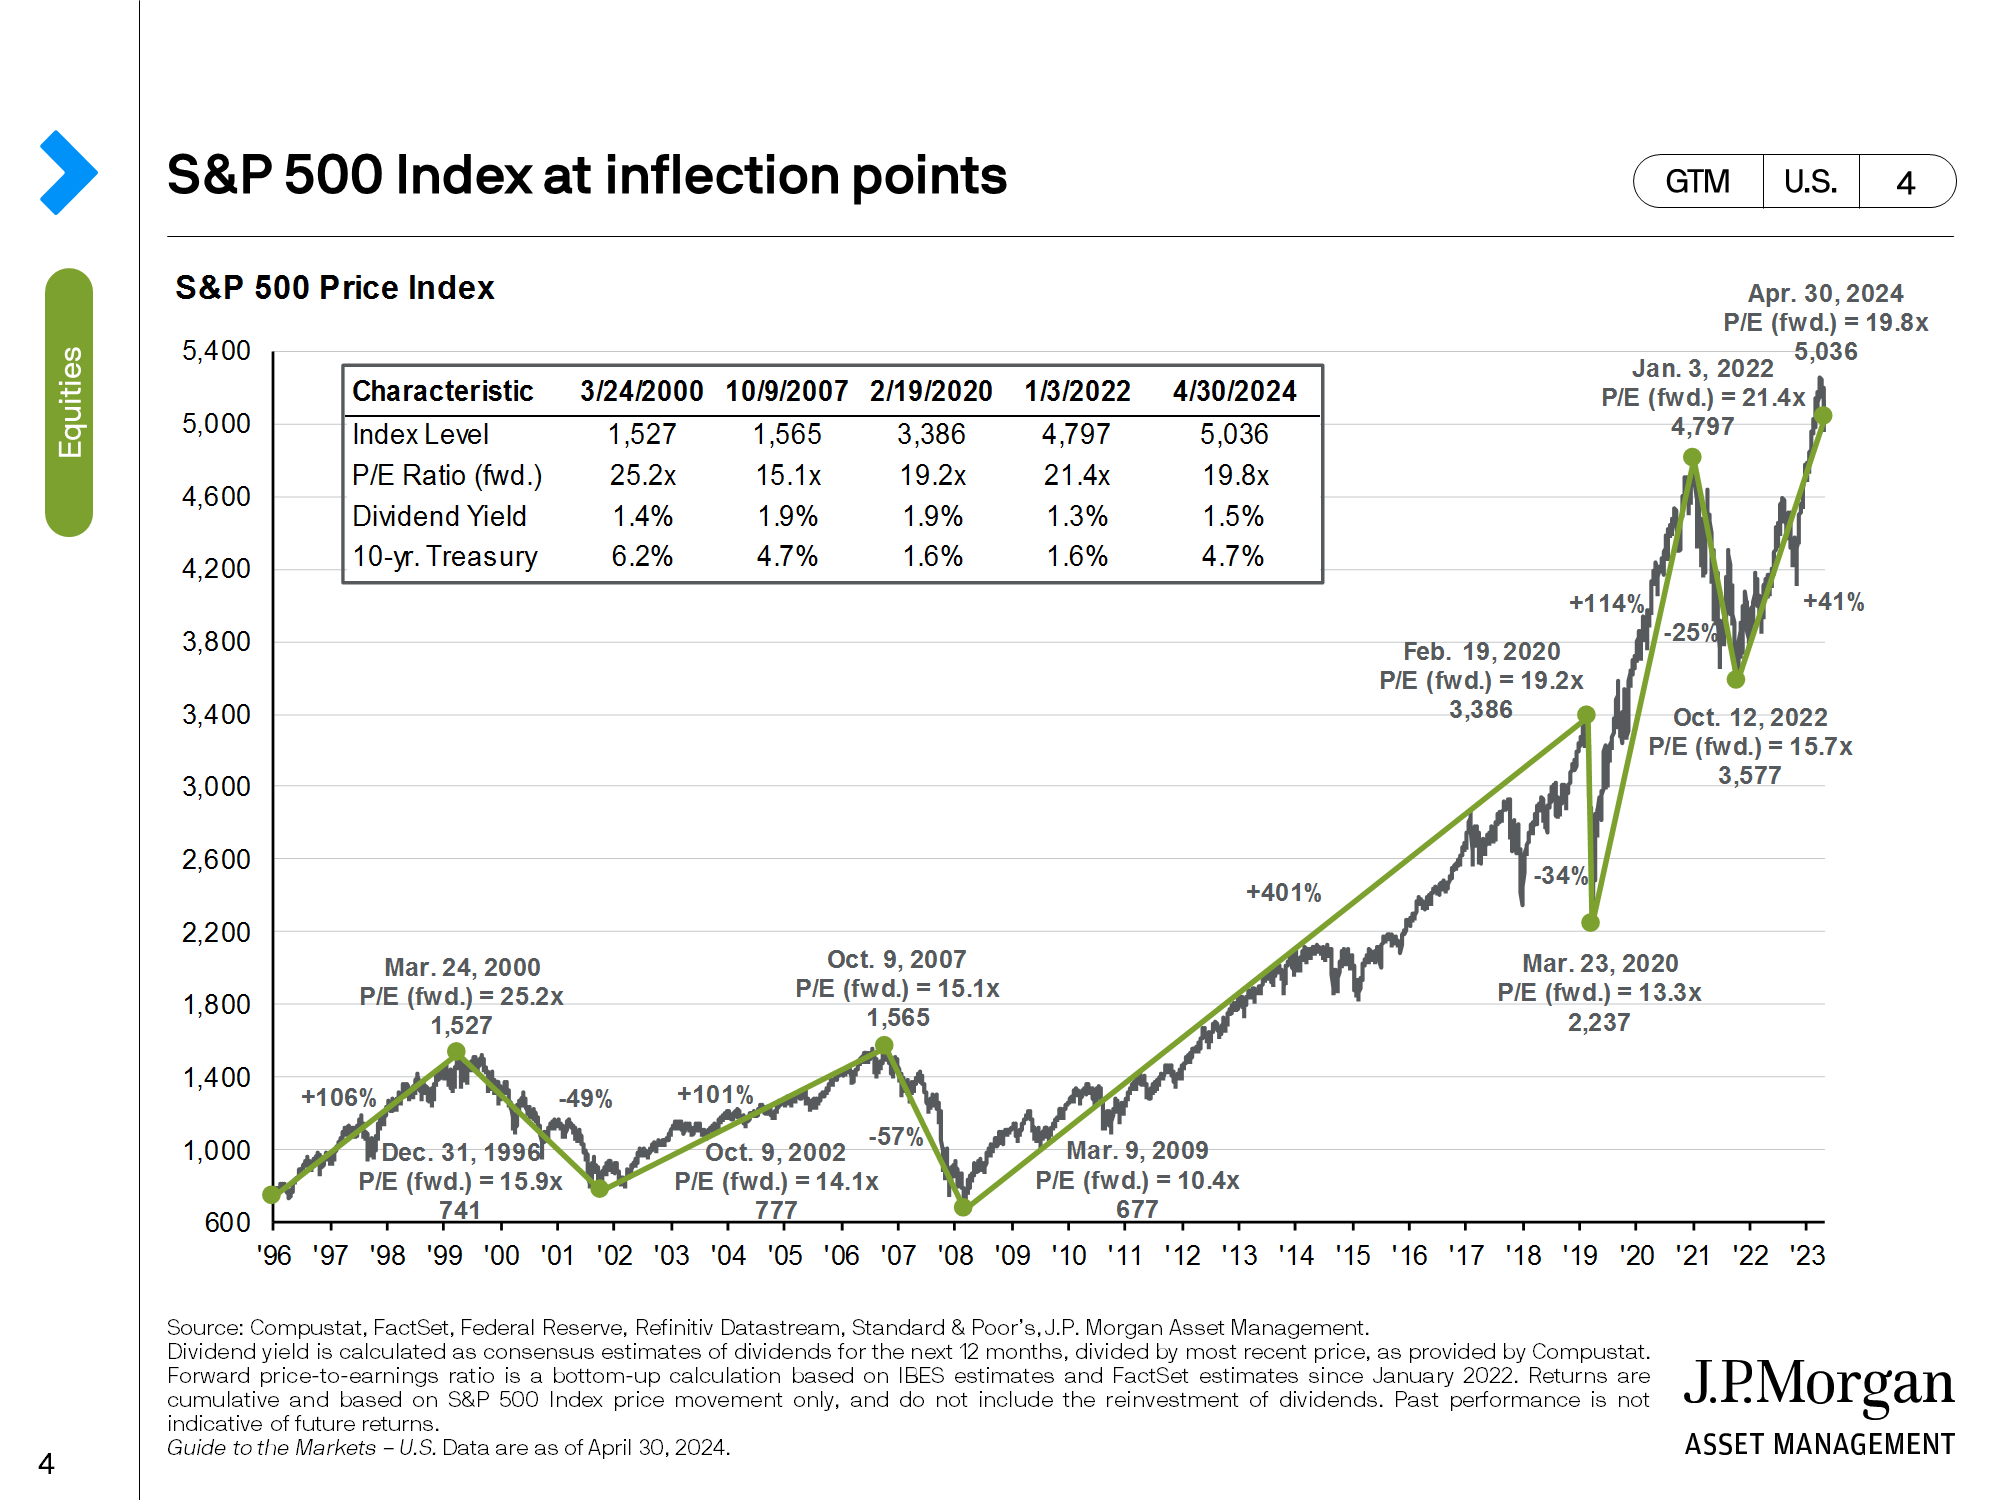 S&P 500 index at inflection points